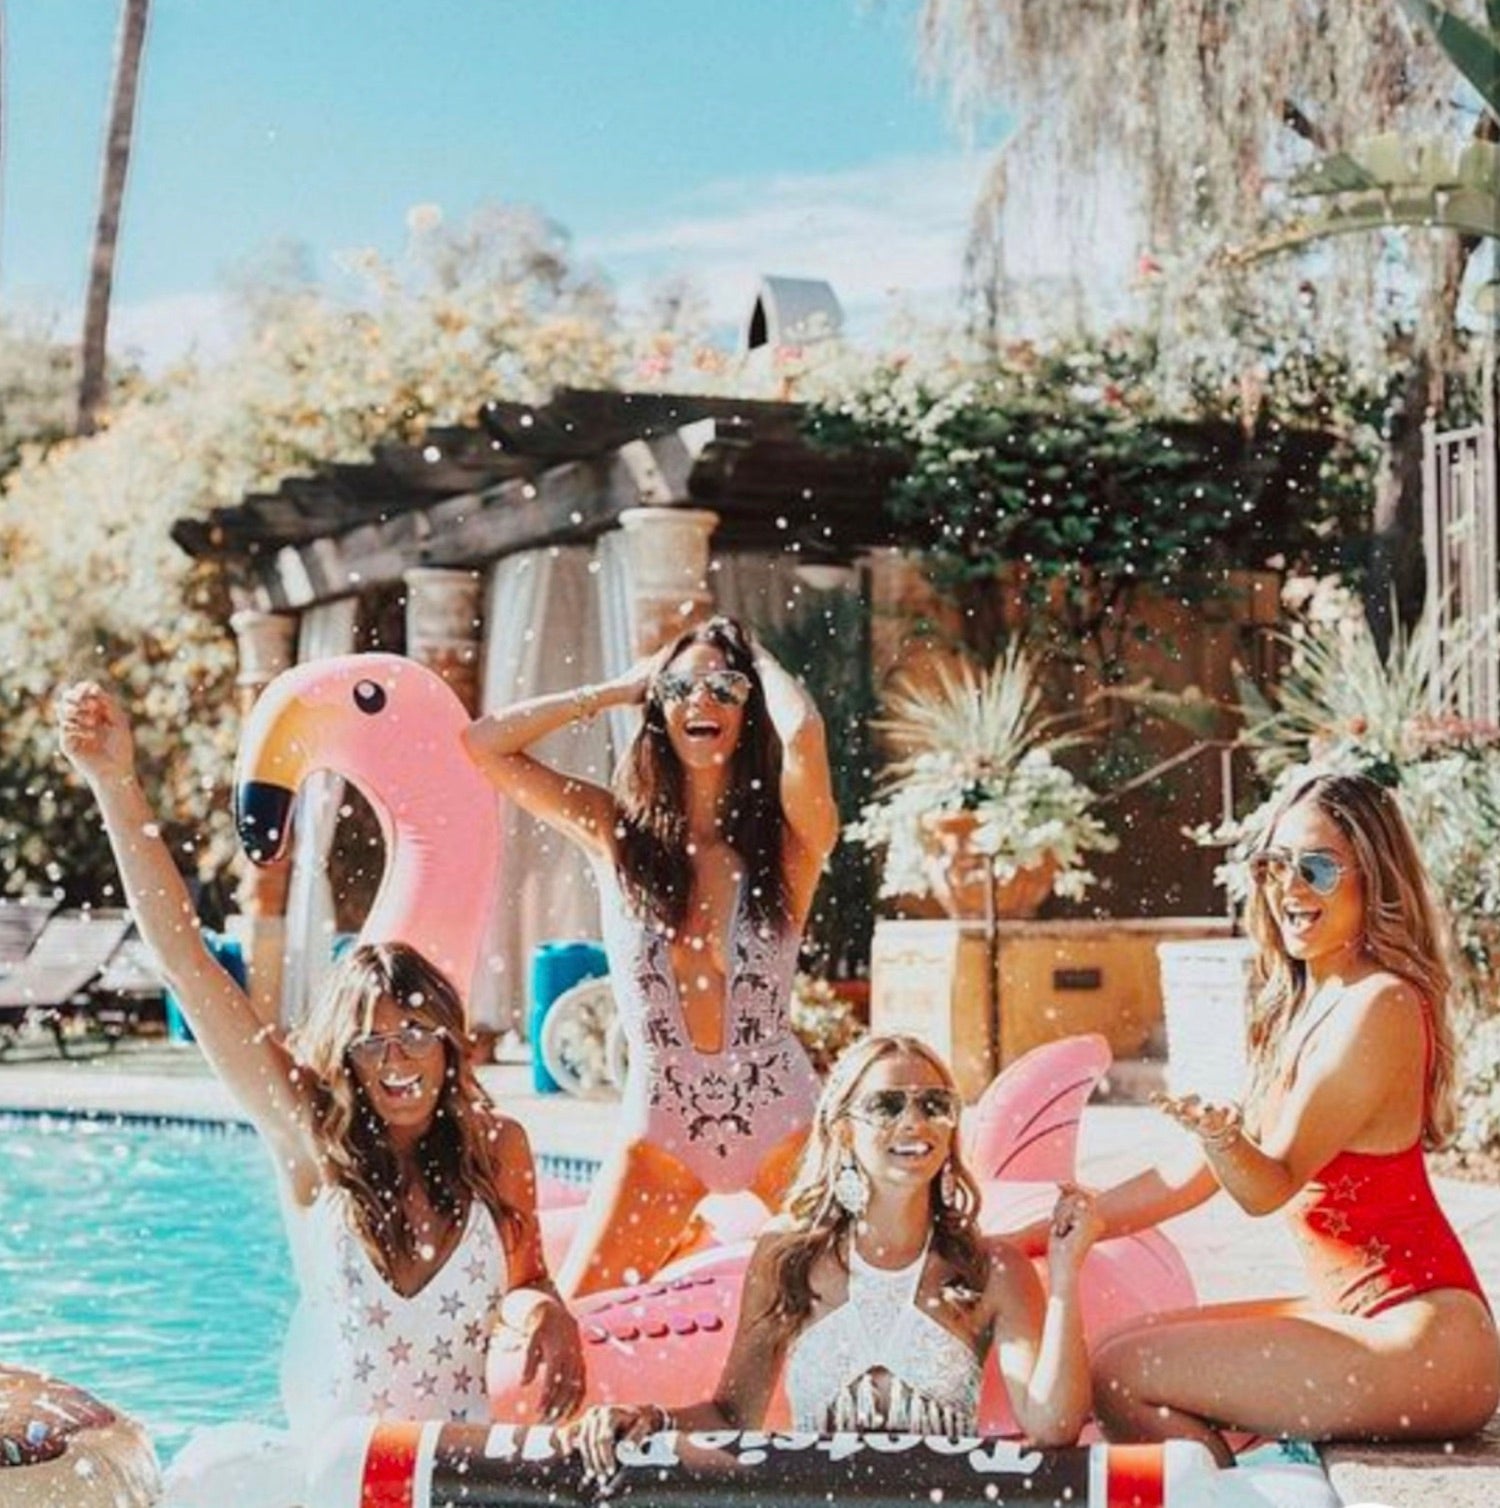 Four girls achieving their best friend goals by having fun at the pool with trendy flamingo and tootsie roll floaties